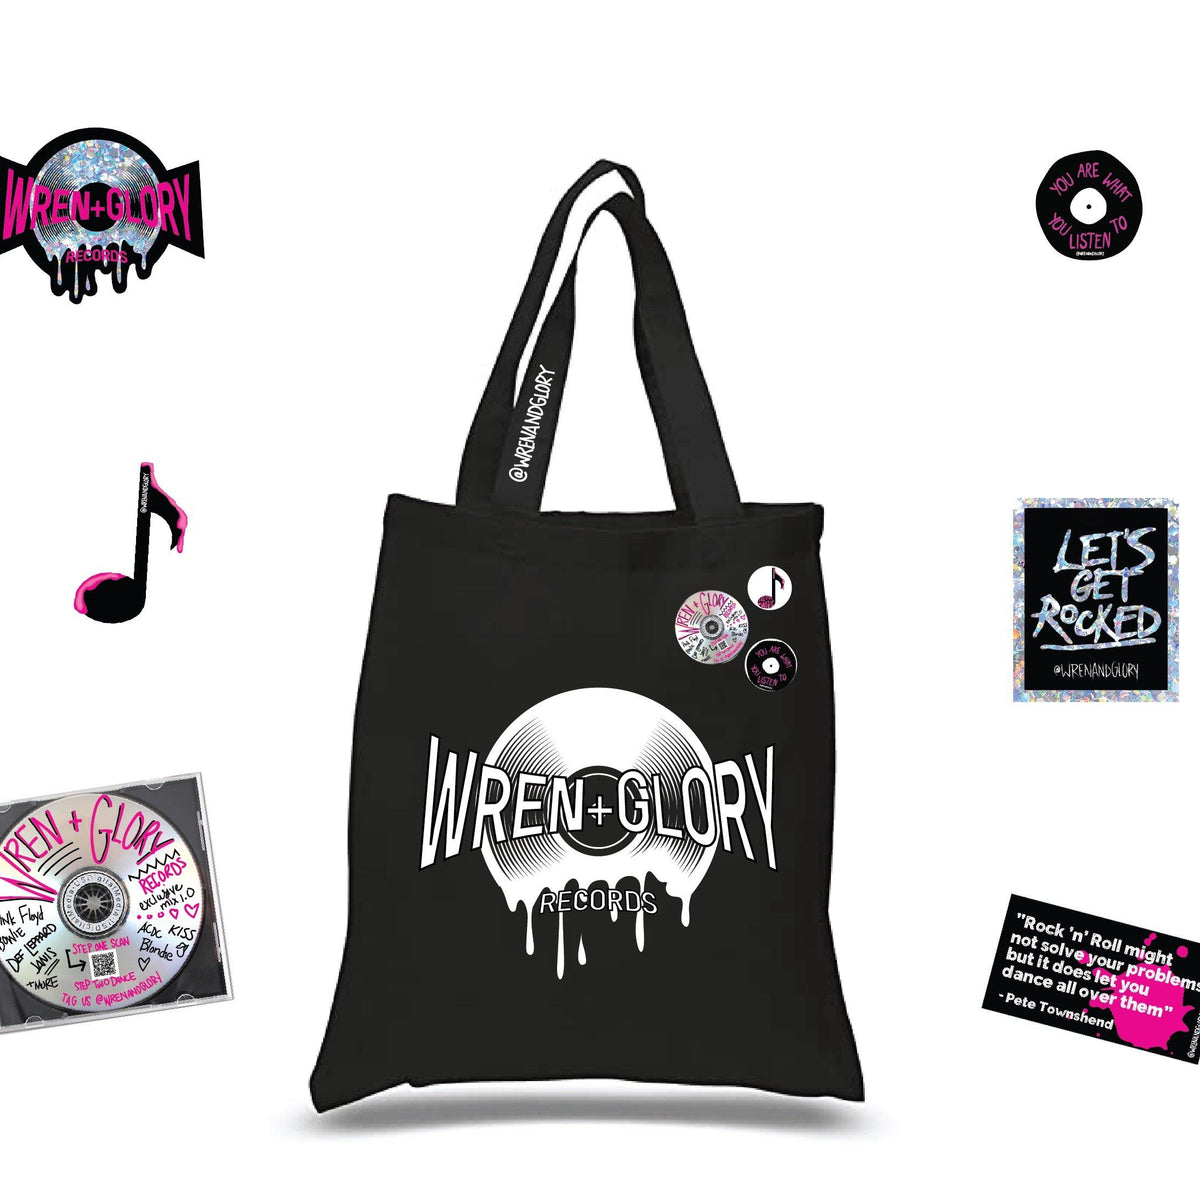 DYNAMSTAR Singer Tote Bag, 200Pcs Stickers, Keychain, Singer Merch, Albums  & Eras Concert Inspired Canvas Tote Bag & Sticker Pack for Fans, Singer's  Merchandise Music Lover Christmas Birthday Gifts, White, One Size